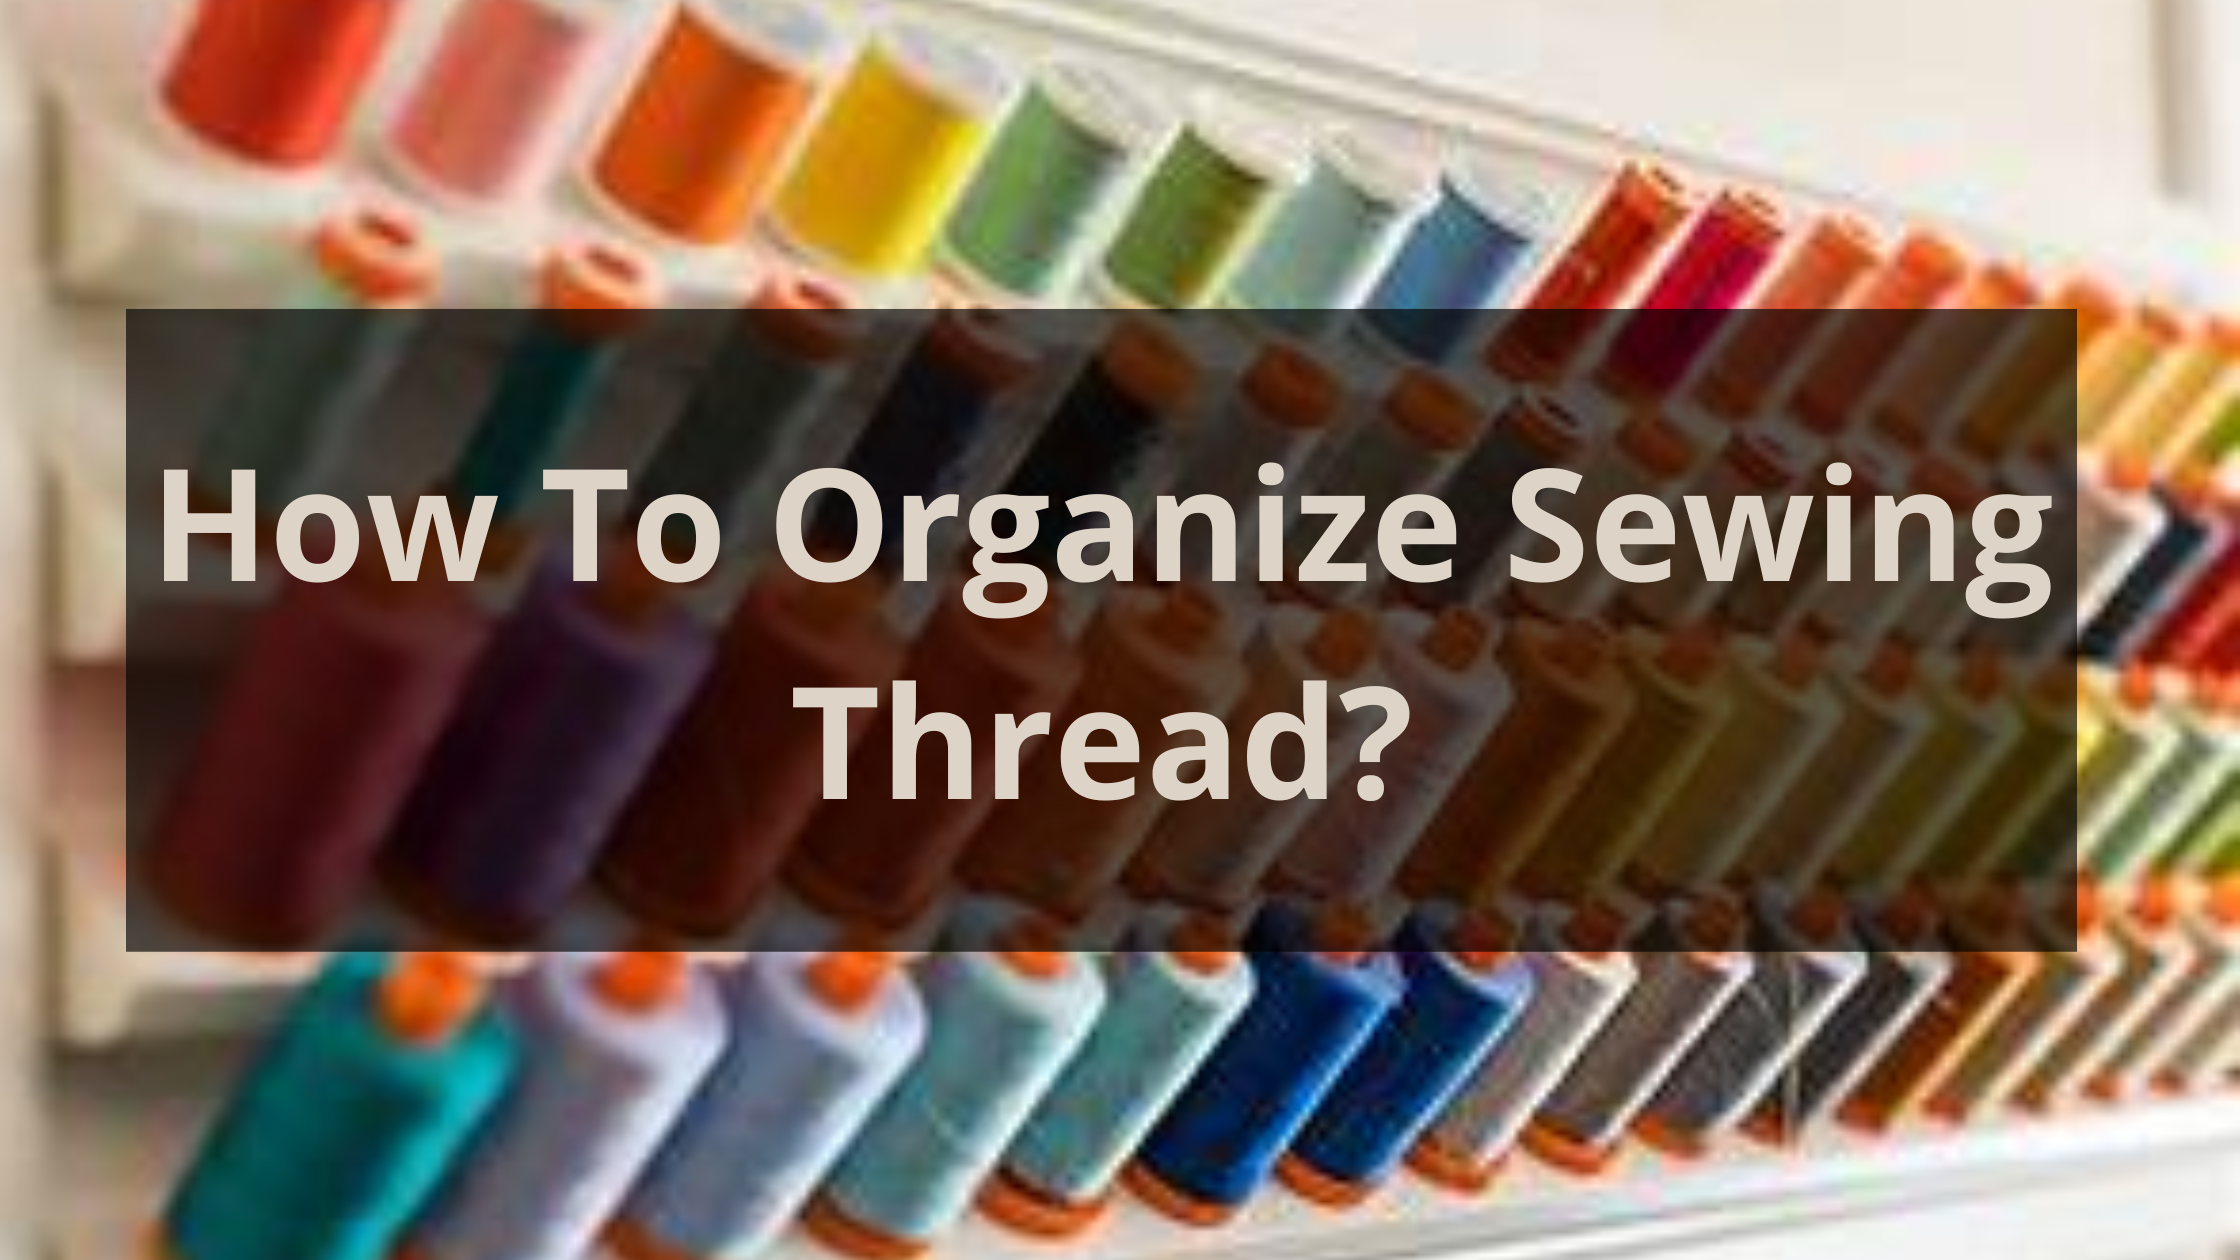 How To Organize Sewing Thread?